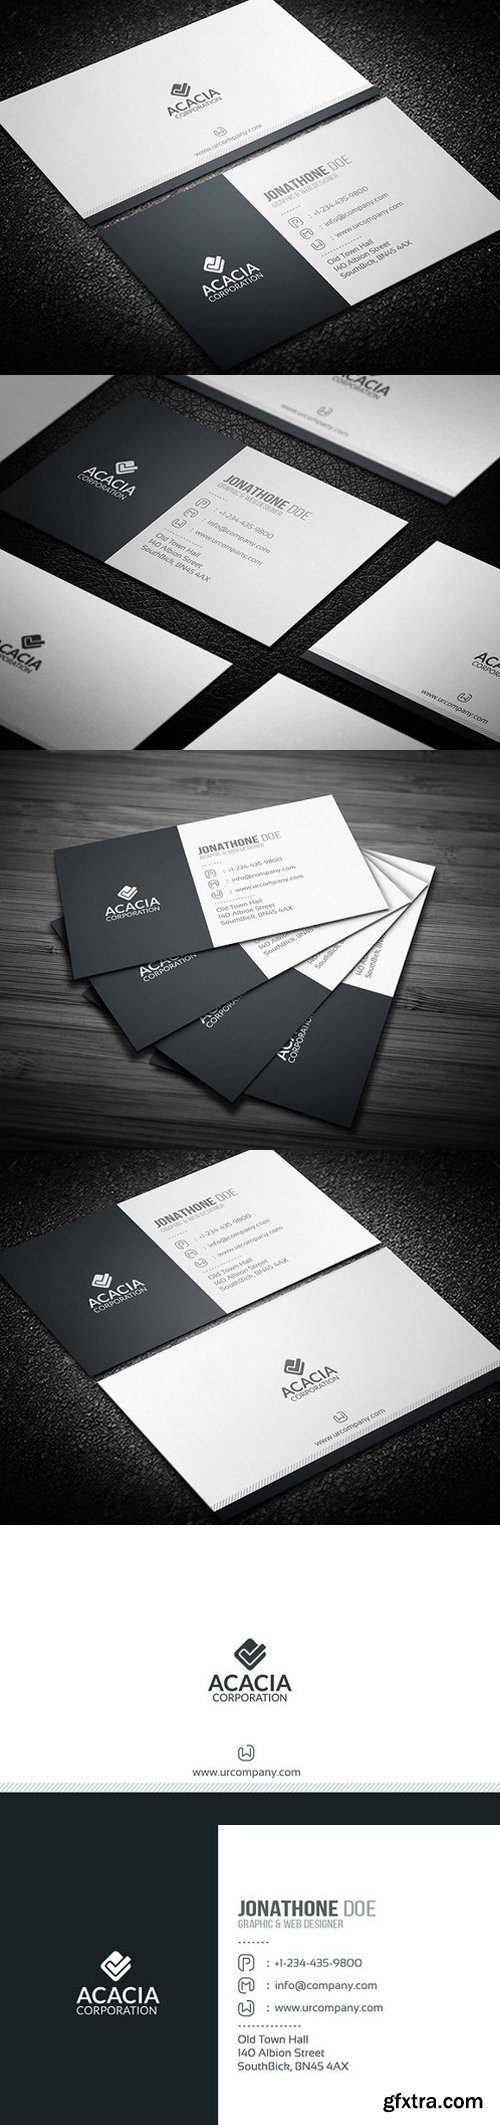 CM - Creative and Simple Business Card 887478